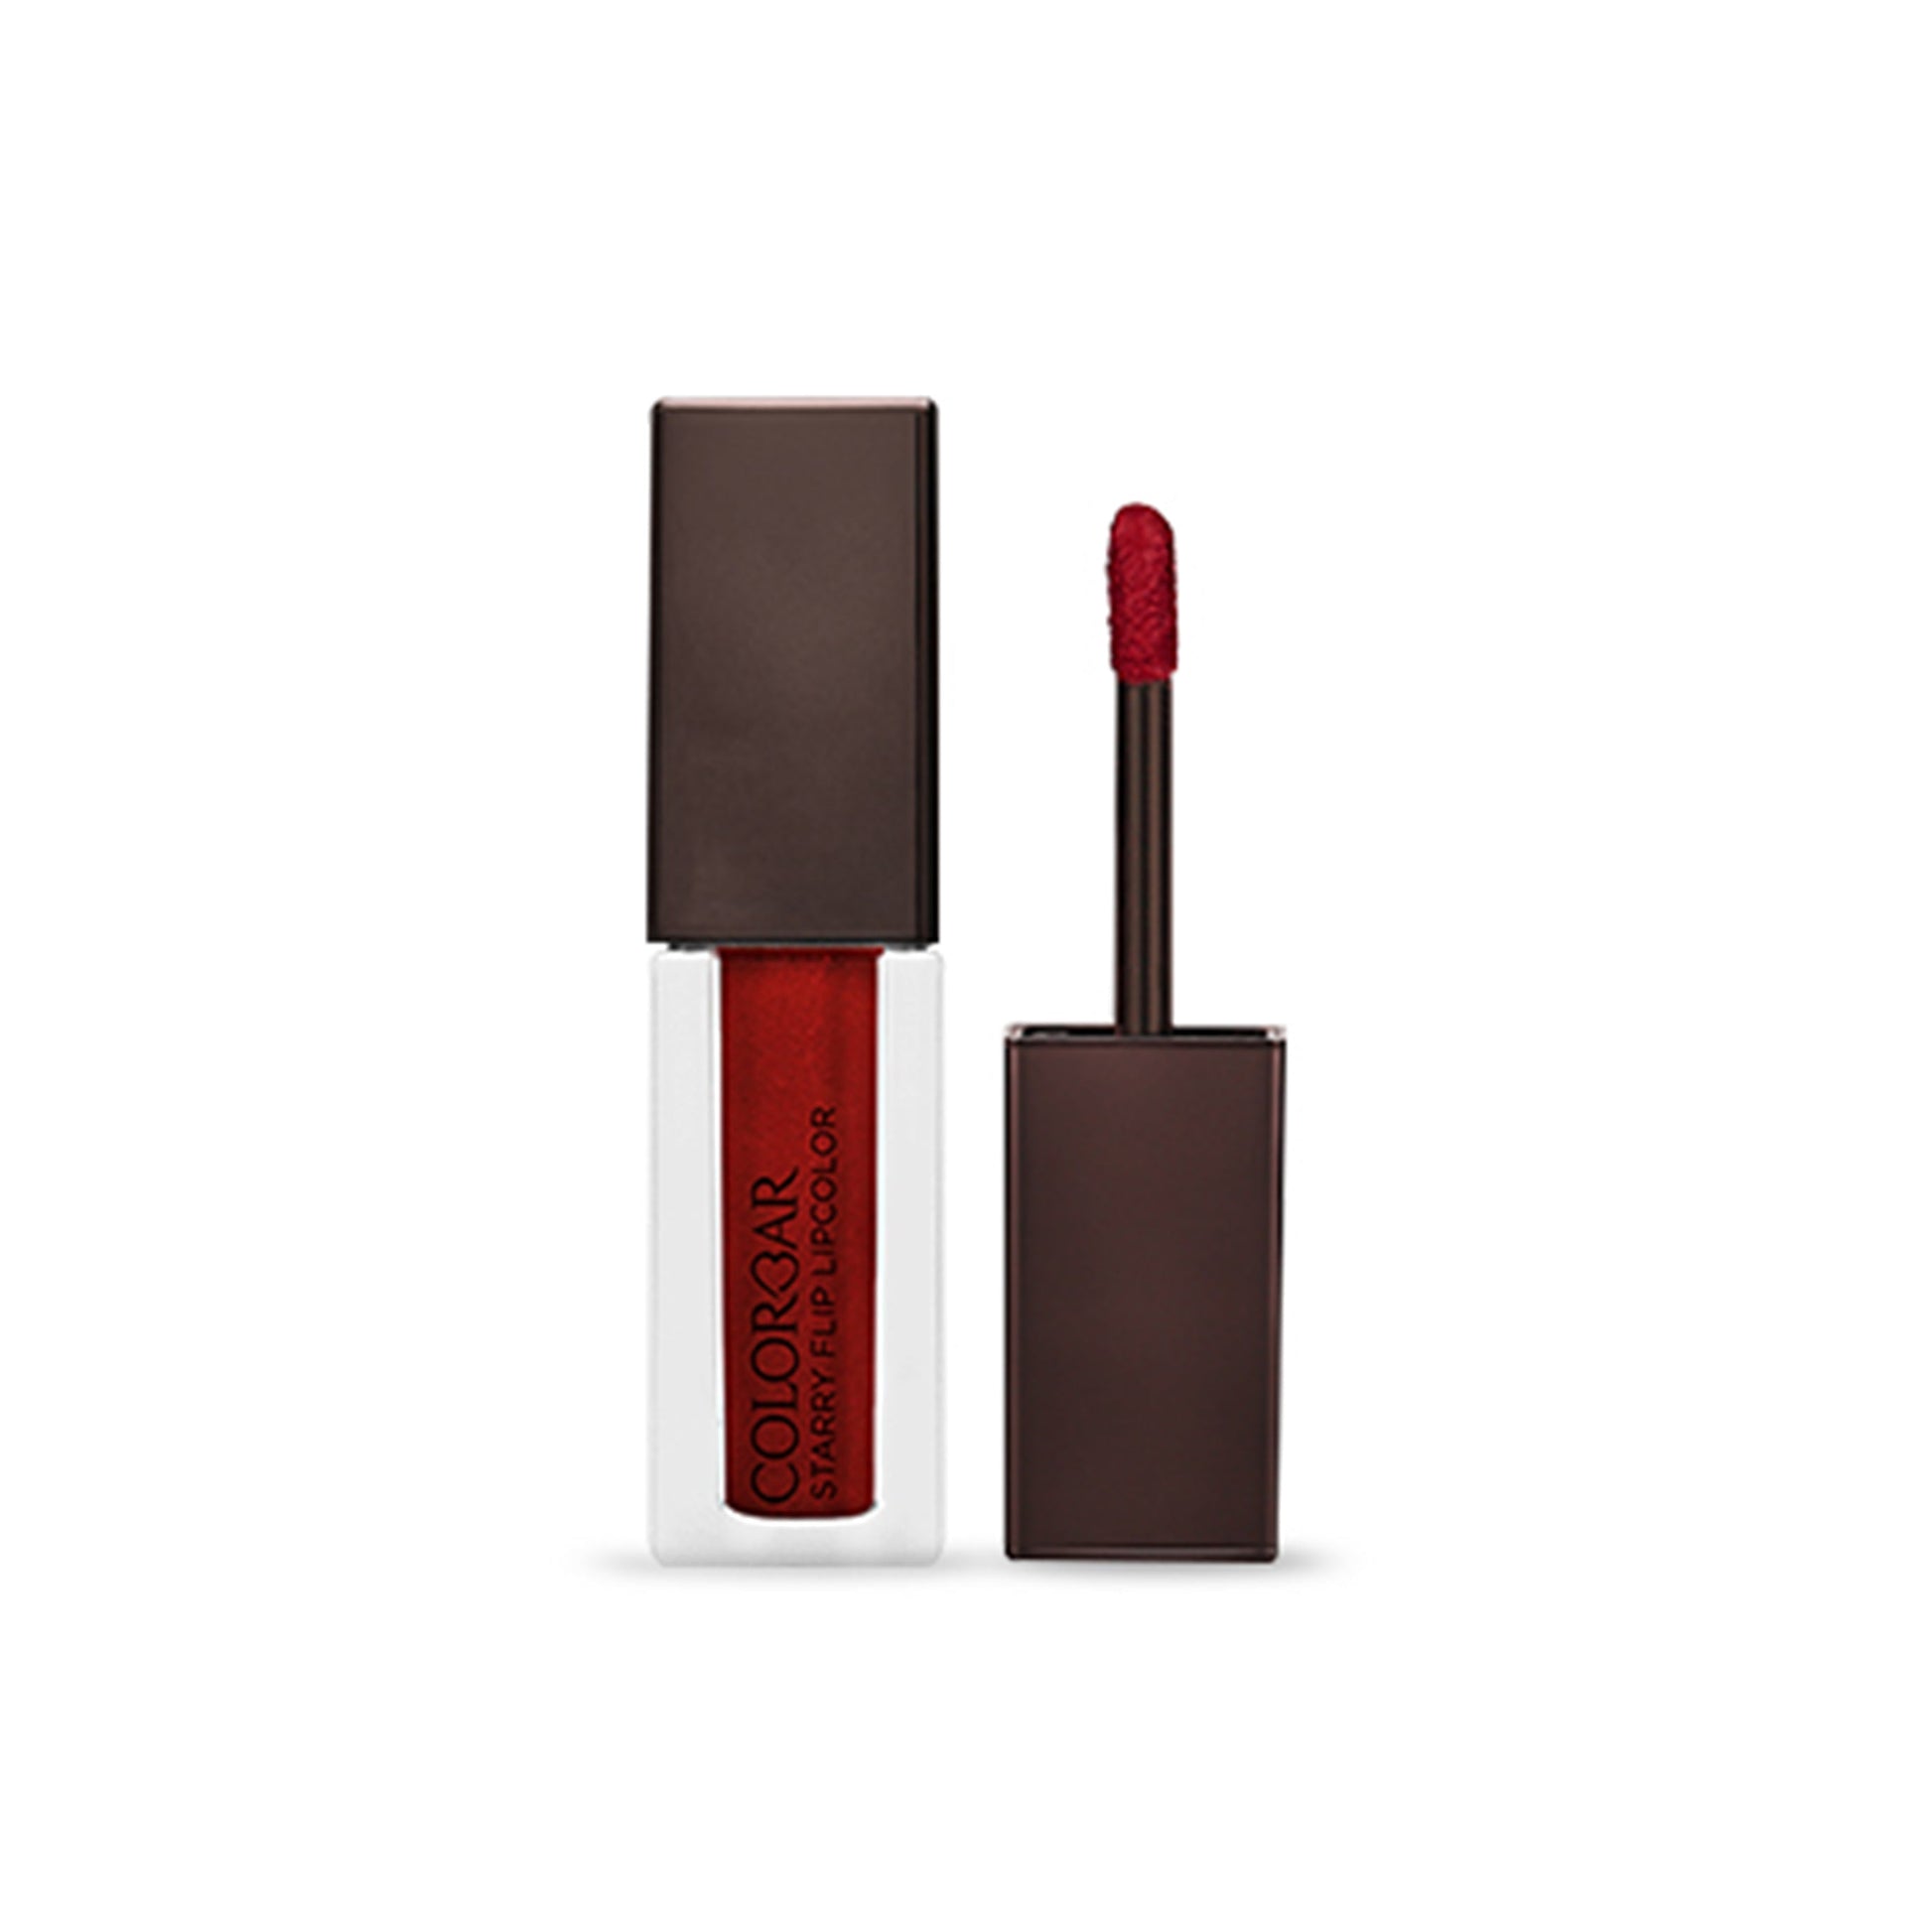 Colorbar Starry Flip Lipcolor Hot As Hell-001 - buy in USA, Australia, Canada